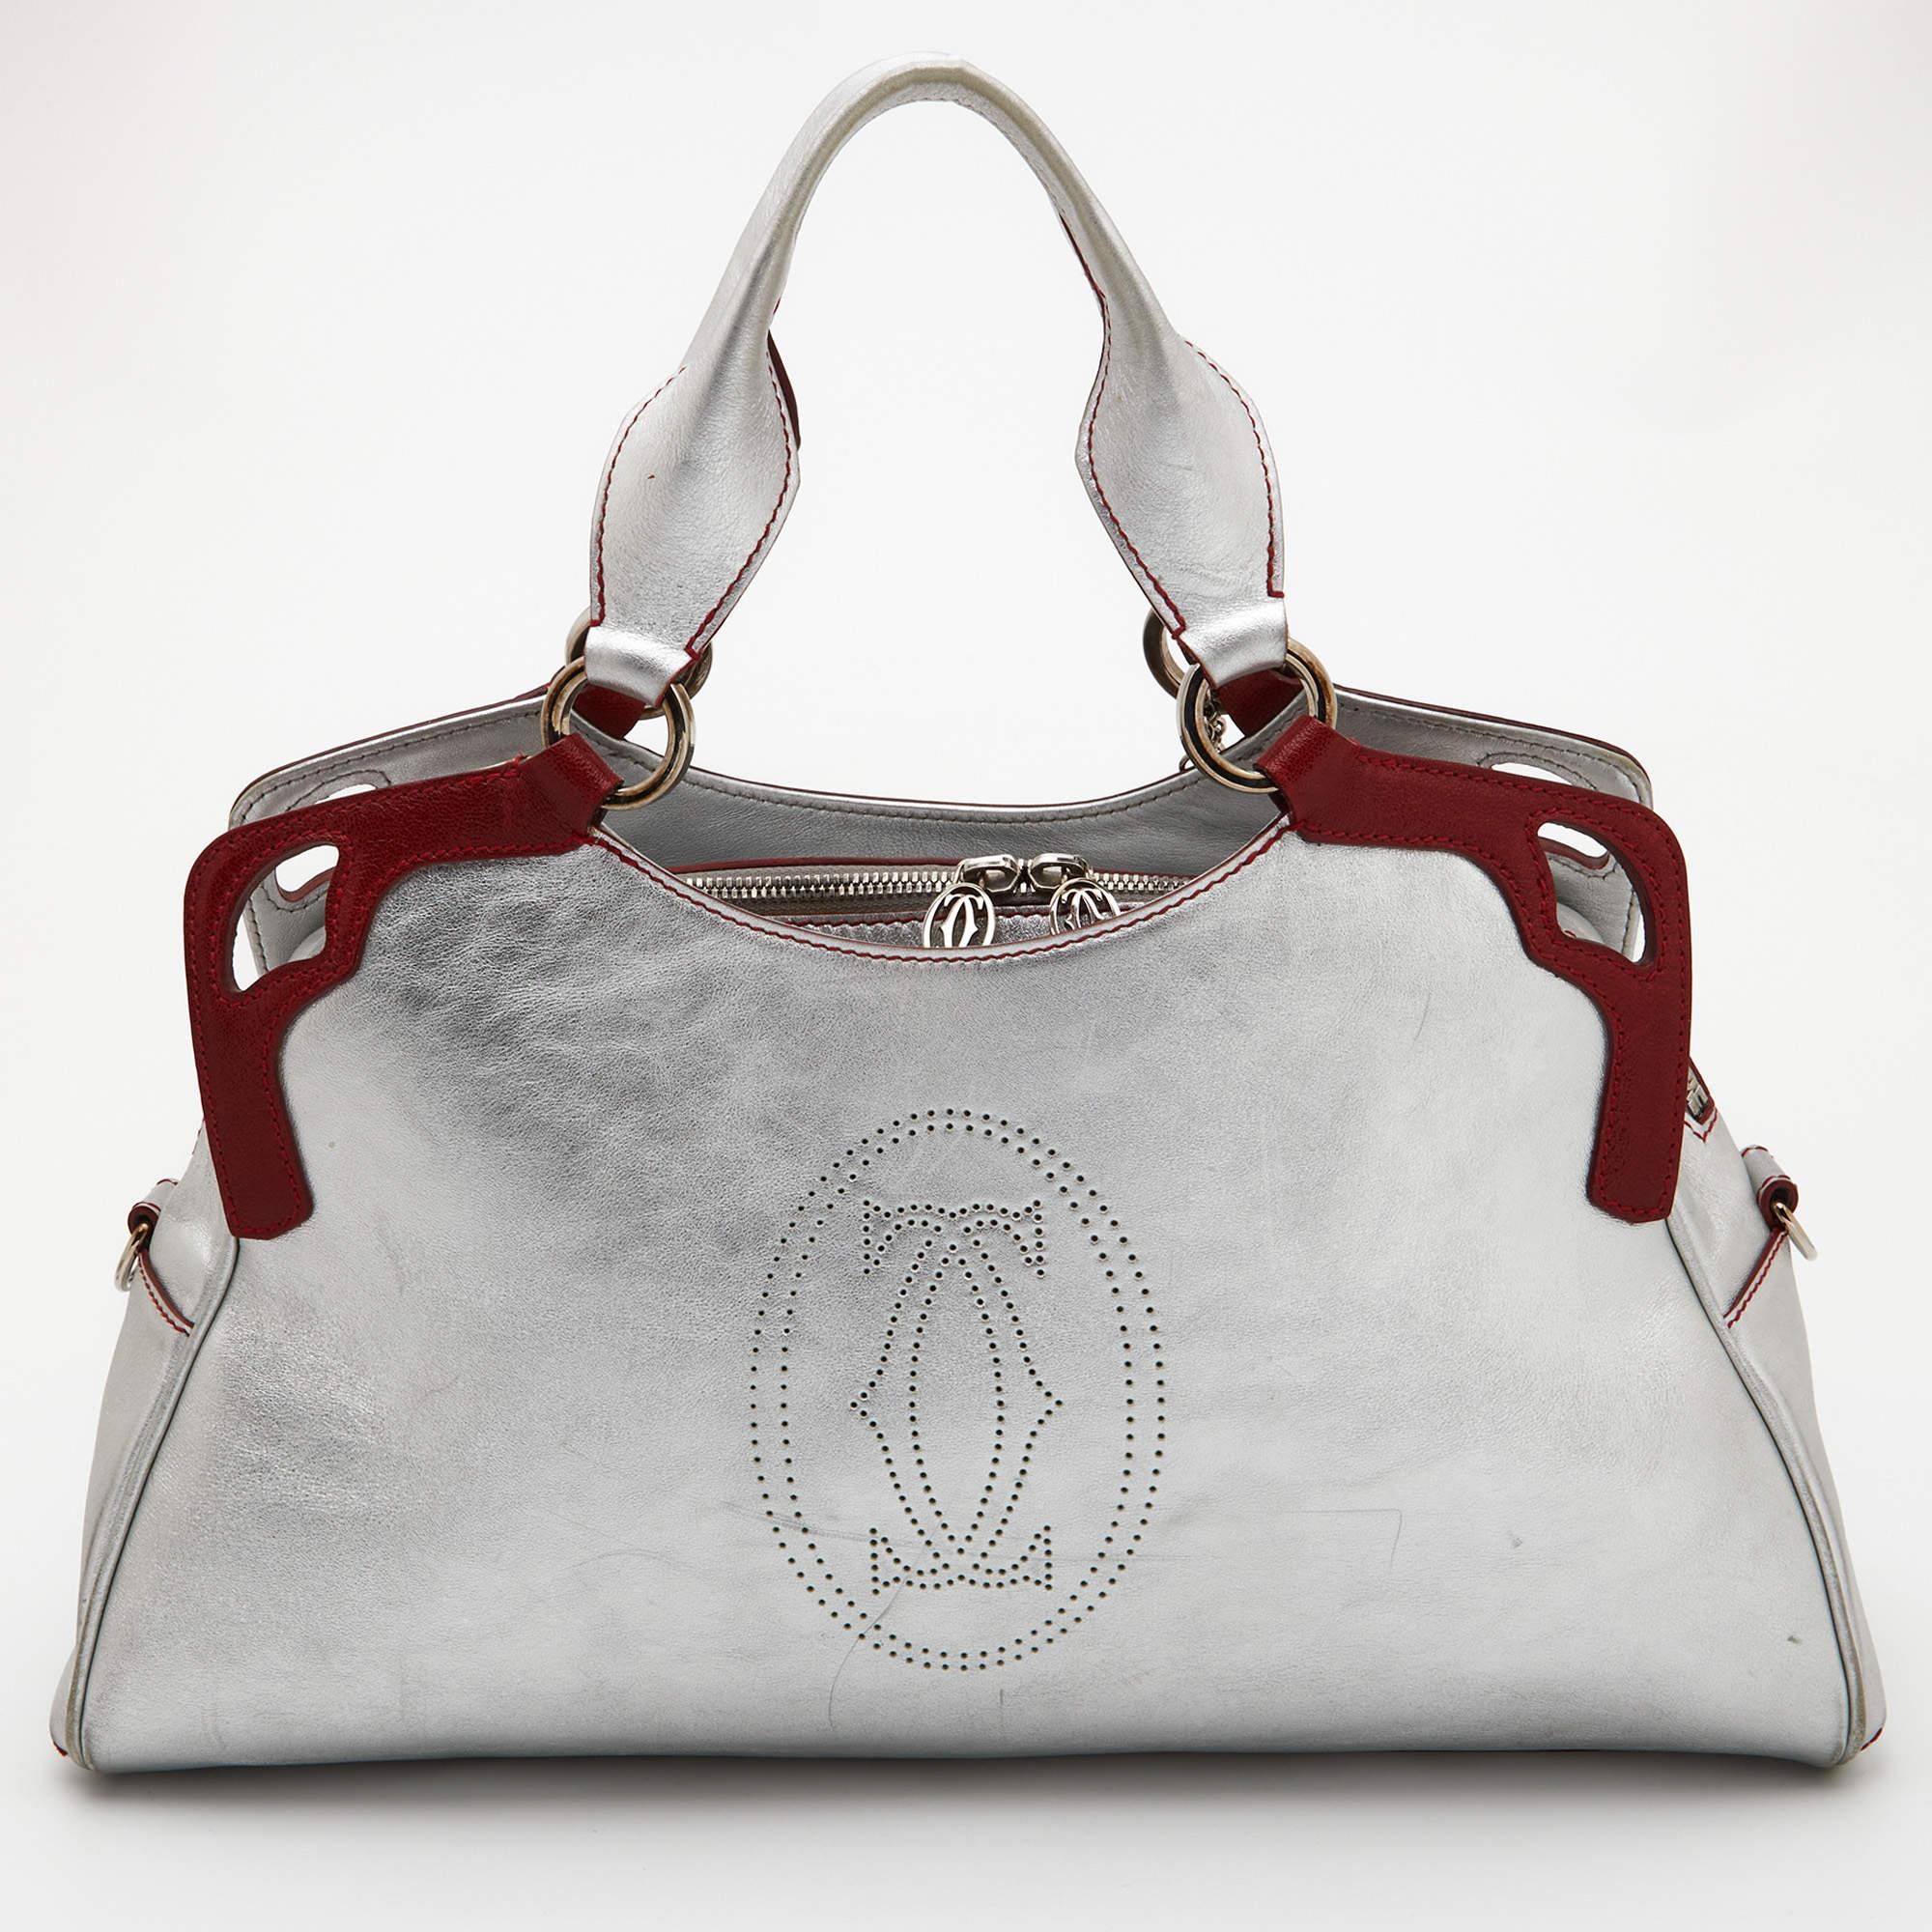 Showcasing classic allure and exceptional design, this Cartier Marcello de Cartier bag will win your vote as a favorite. It comes created from leather with a brand signature on the front, and it embodies an attractive silver & red shade. Lined with